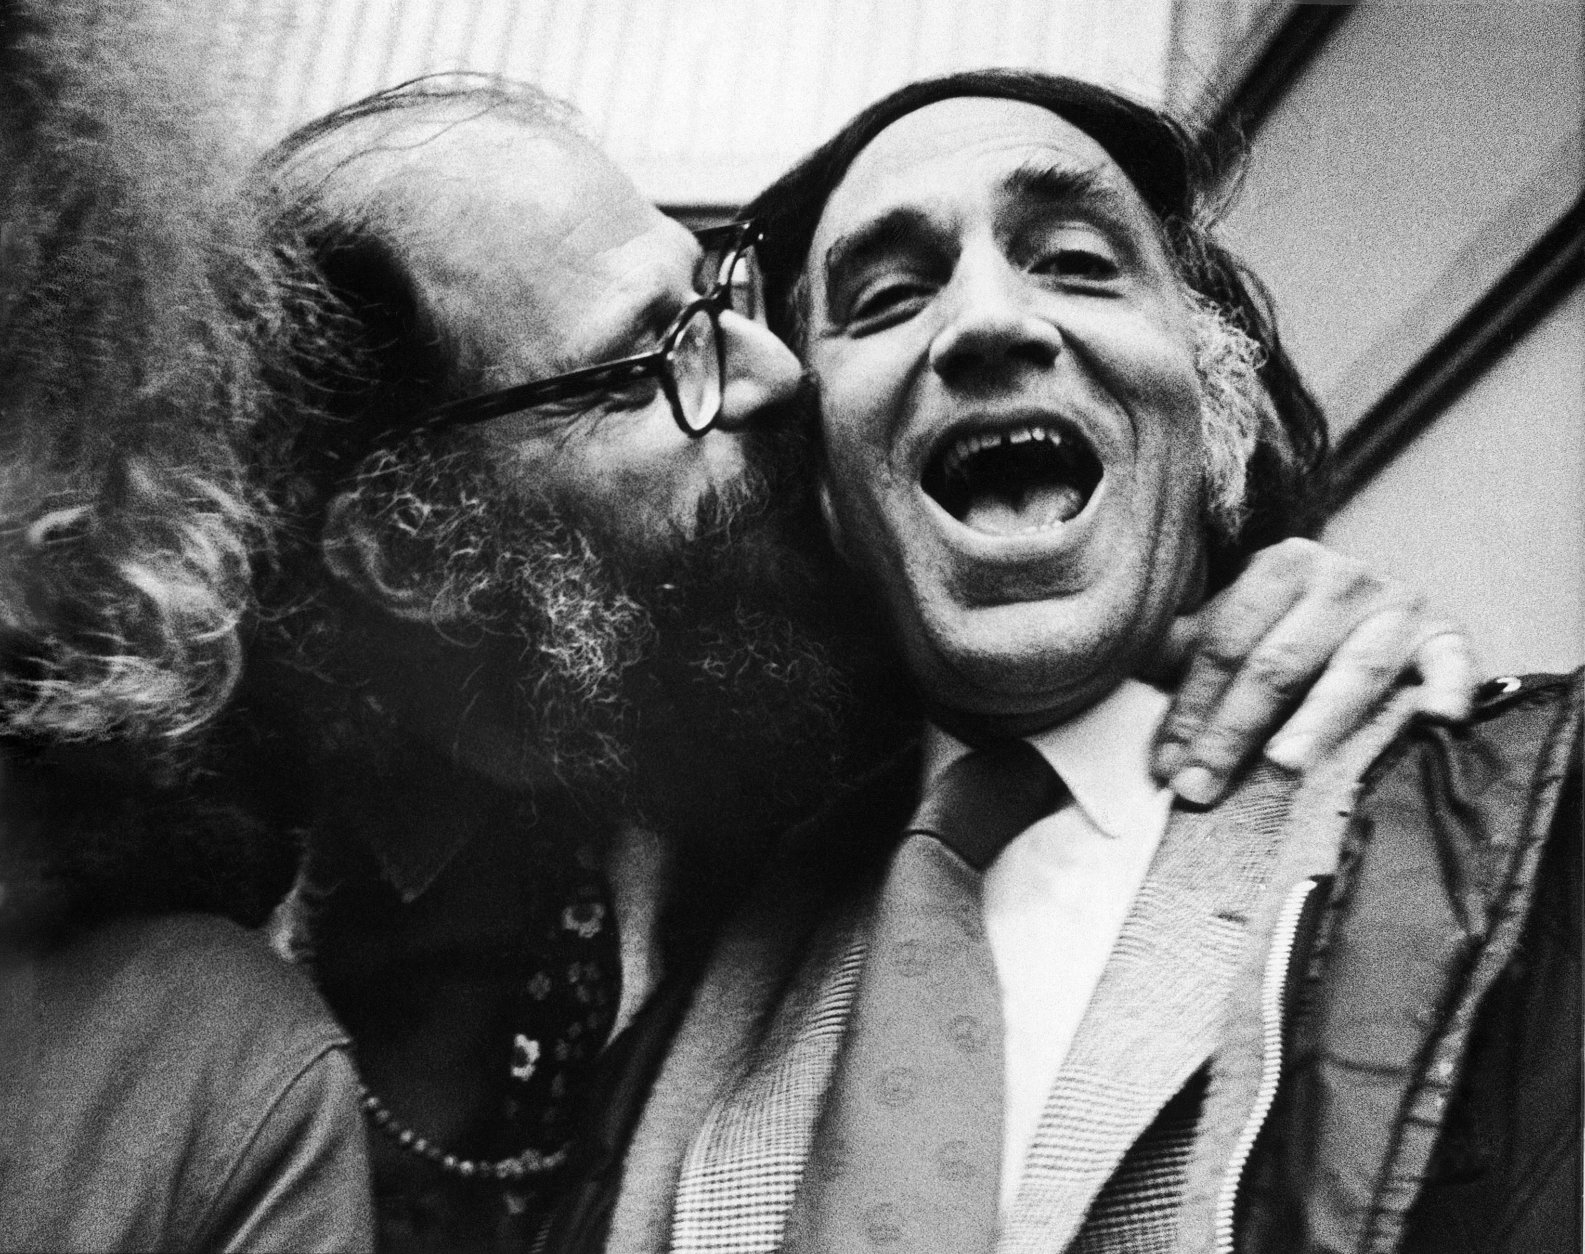 Allen Ginsberg, 44, beat generation poet, thanks lawyer William Kunstler in Detroit Jan. 15, 1971, for bringing him to the preliminary hearings of three White Panthers Party members accused of bombing a CIA building in Ann Arbor, Michigan. Kunstler hopes to qualify Ginsberg as an expert witness on youth. (AP Photo)